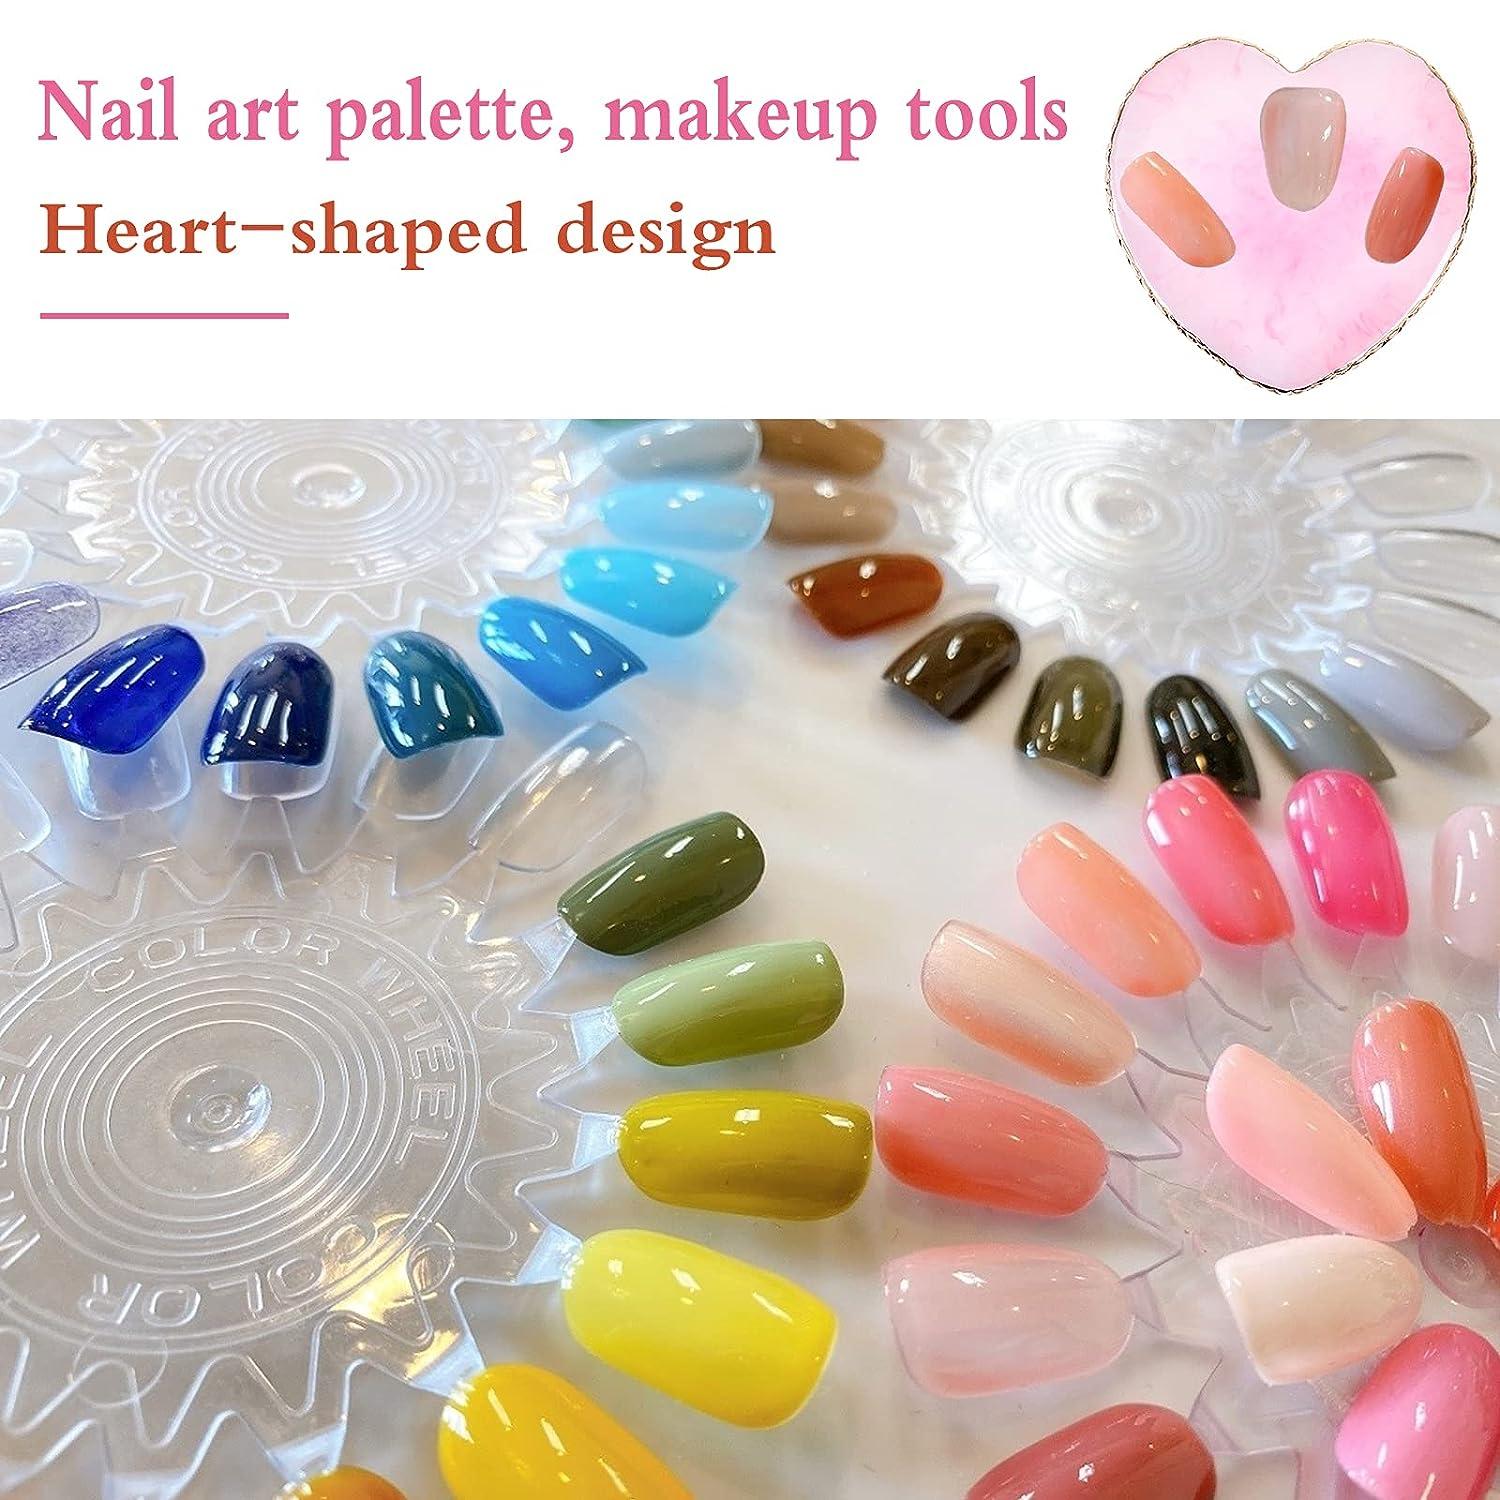 Oneleaf Resin Nail Art Palette, Gel Polish Color Mixing Plate Drawing Painting Dish, Golden Edge Resin Stone, Makeup Palettes, Manicure Nail DIY